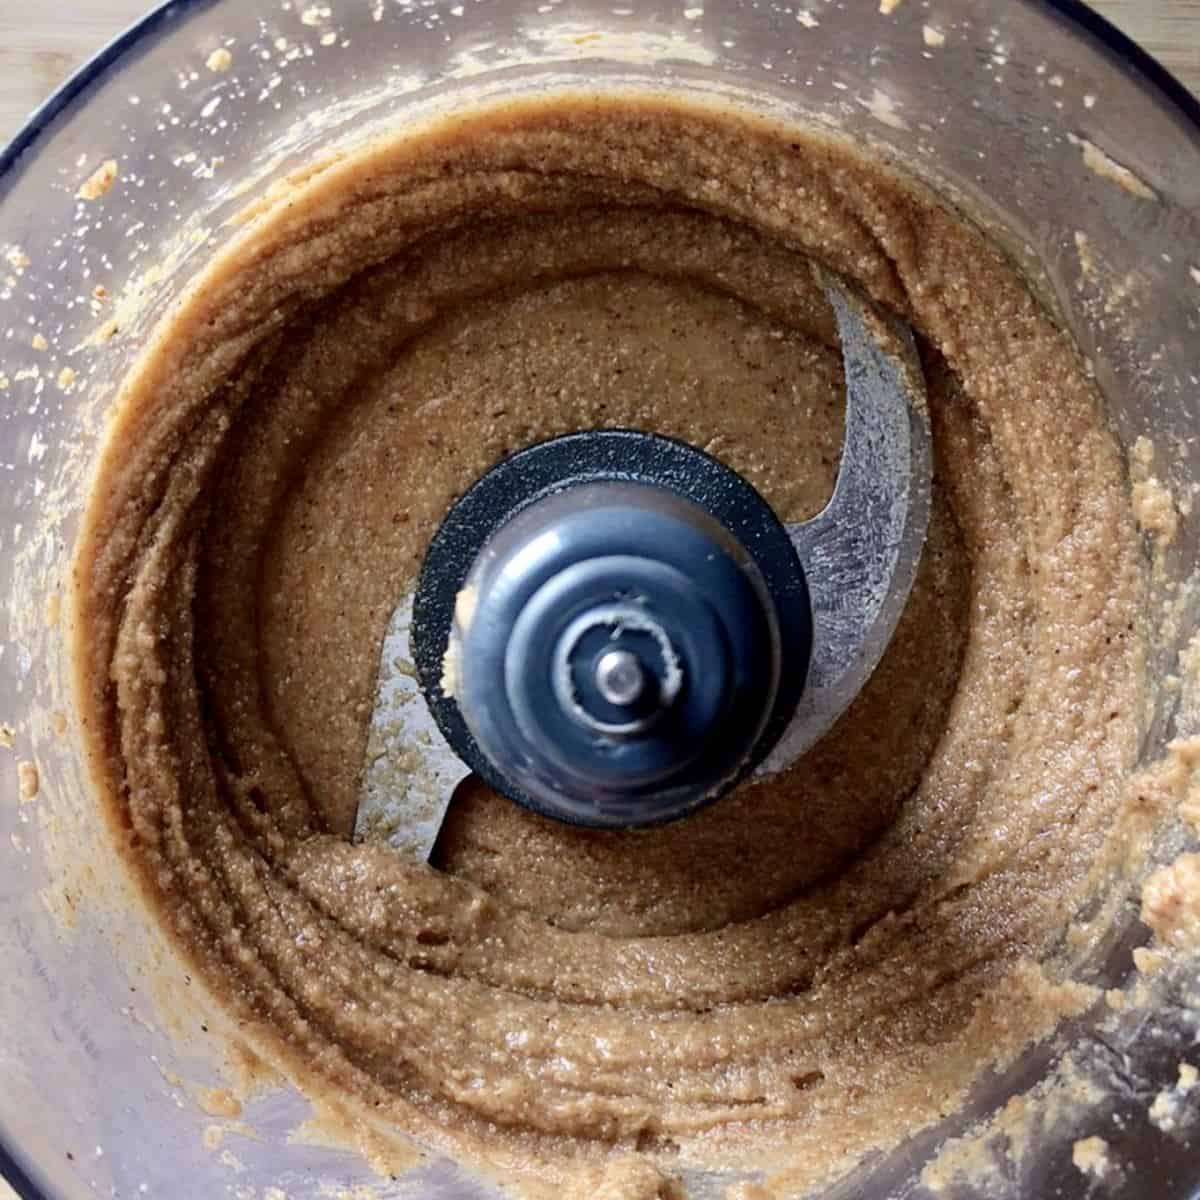 Homemade nut butter in a food processor.